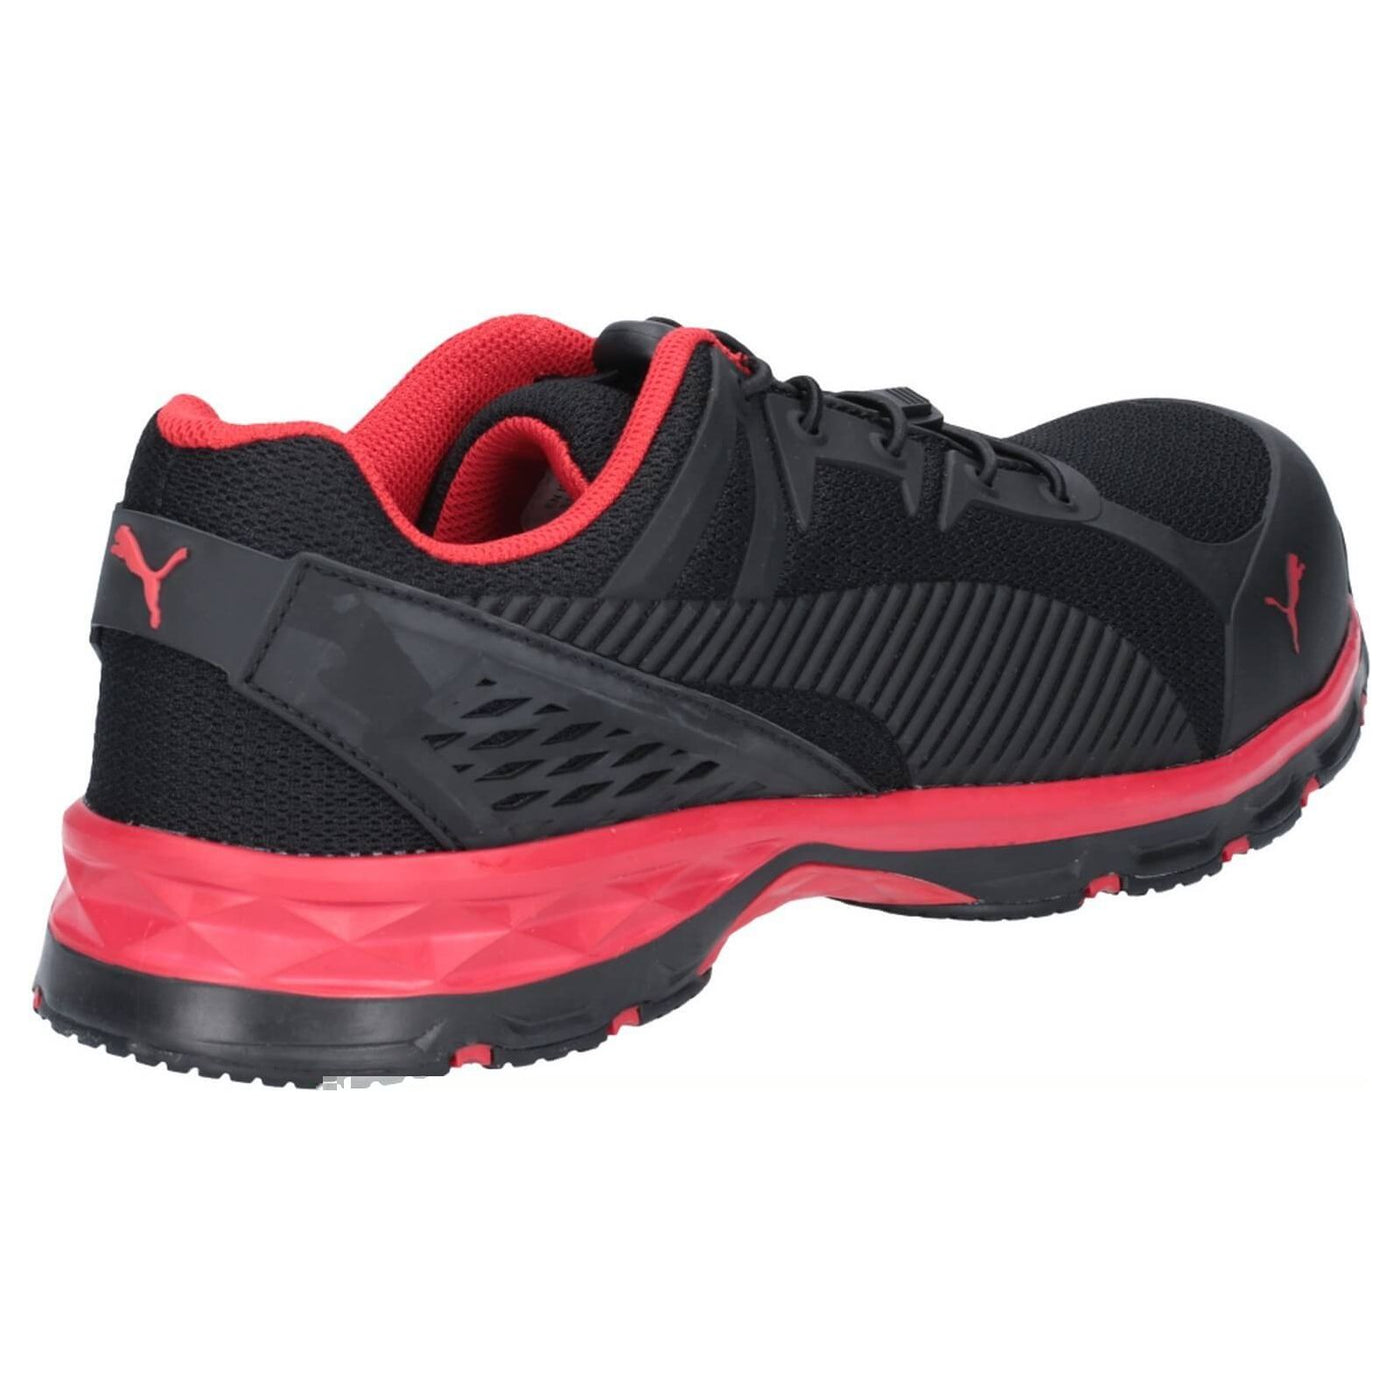 Puma Fuse Motion 2.0 Safety Shoes-Red-Black-2